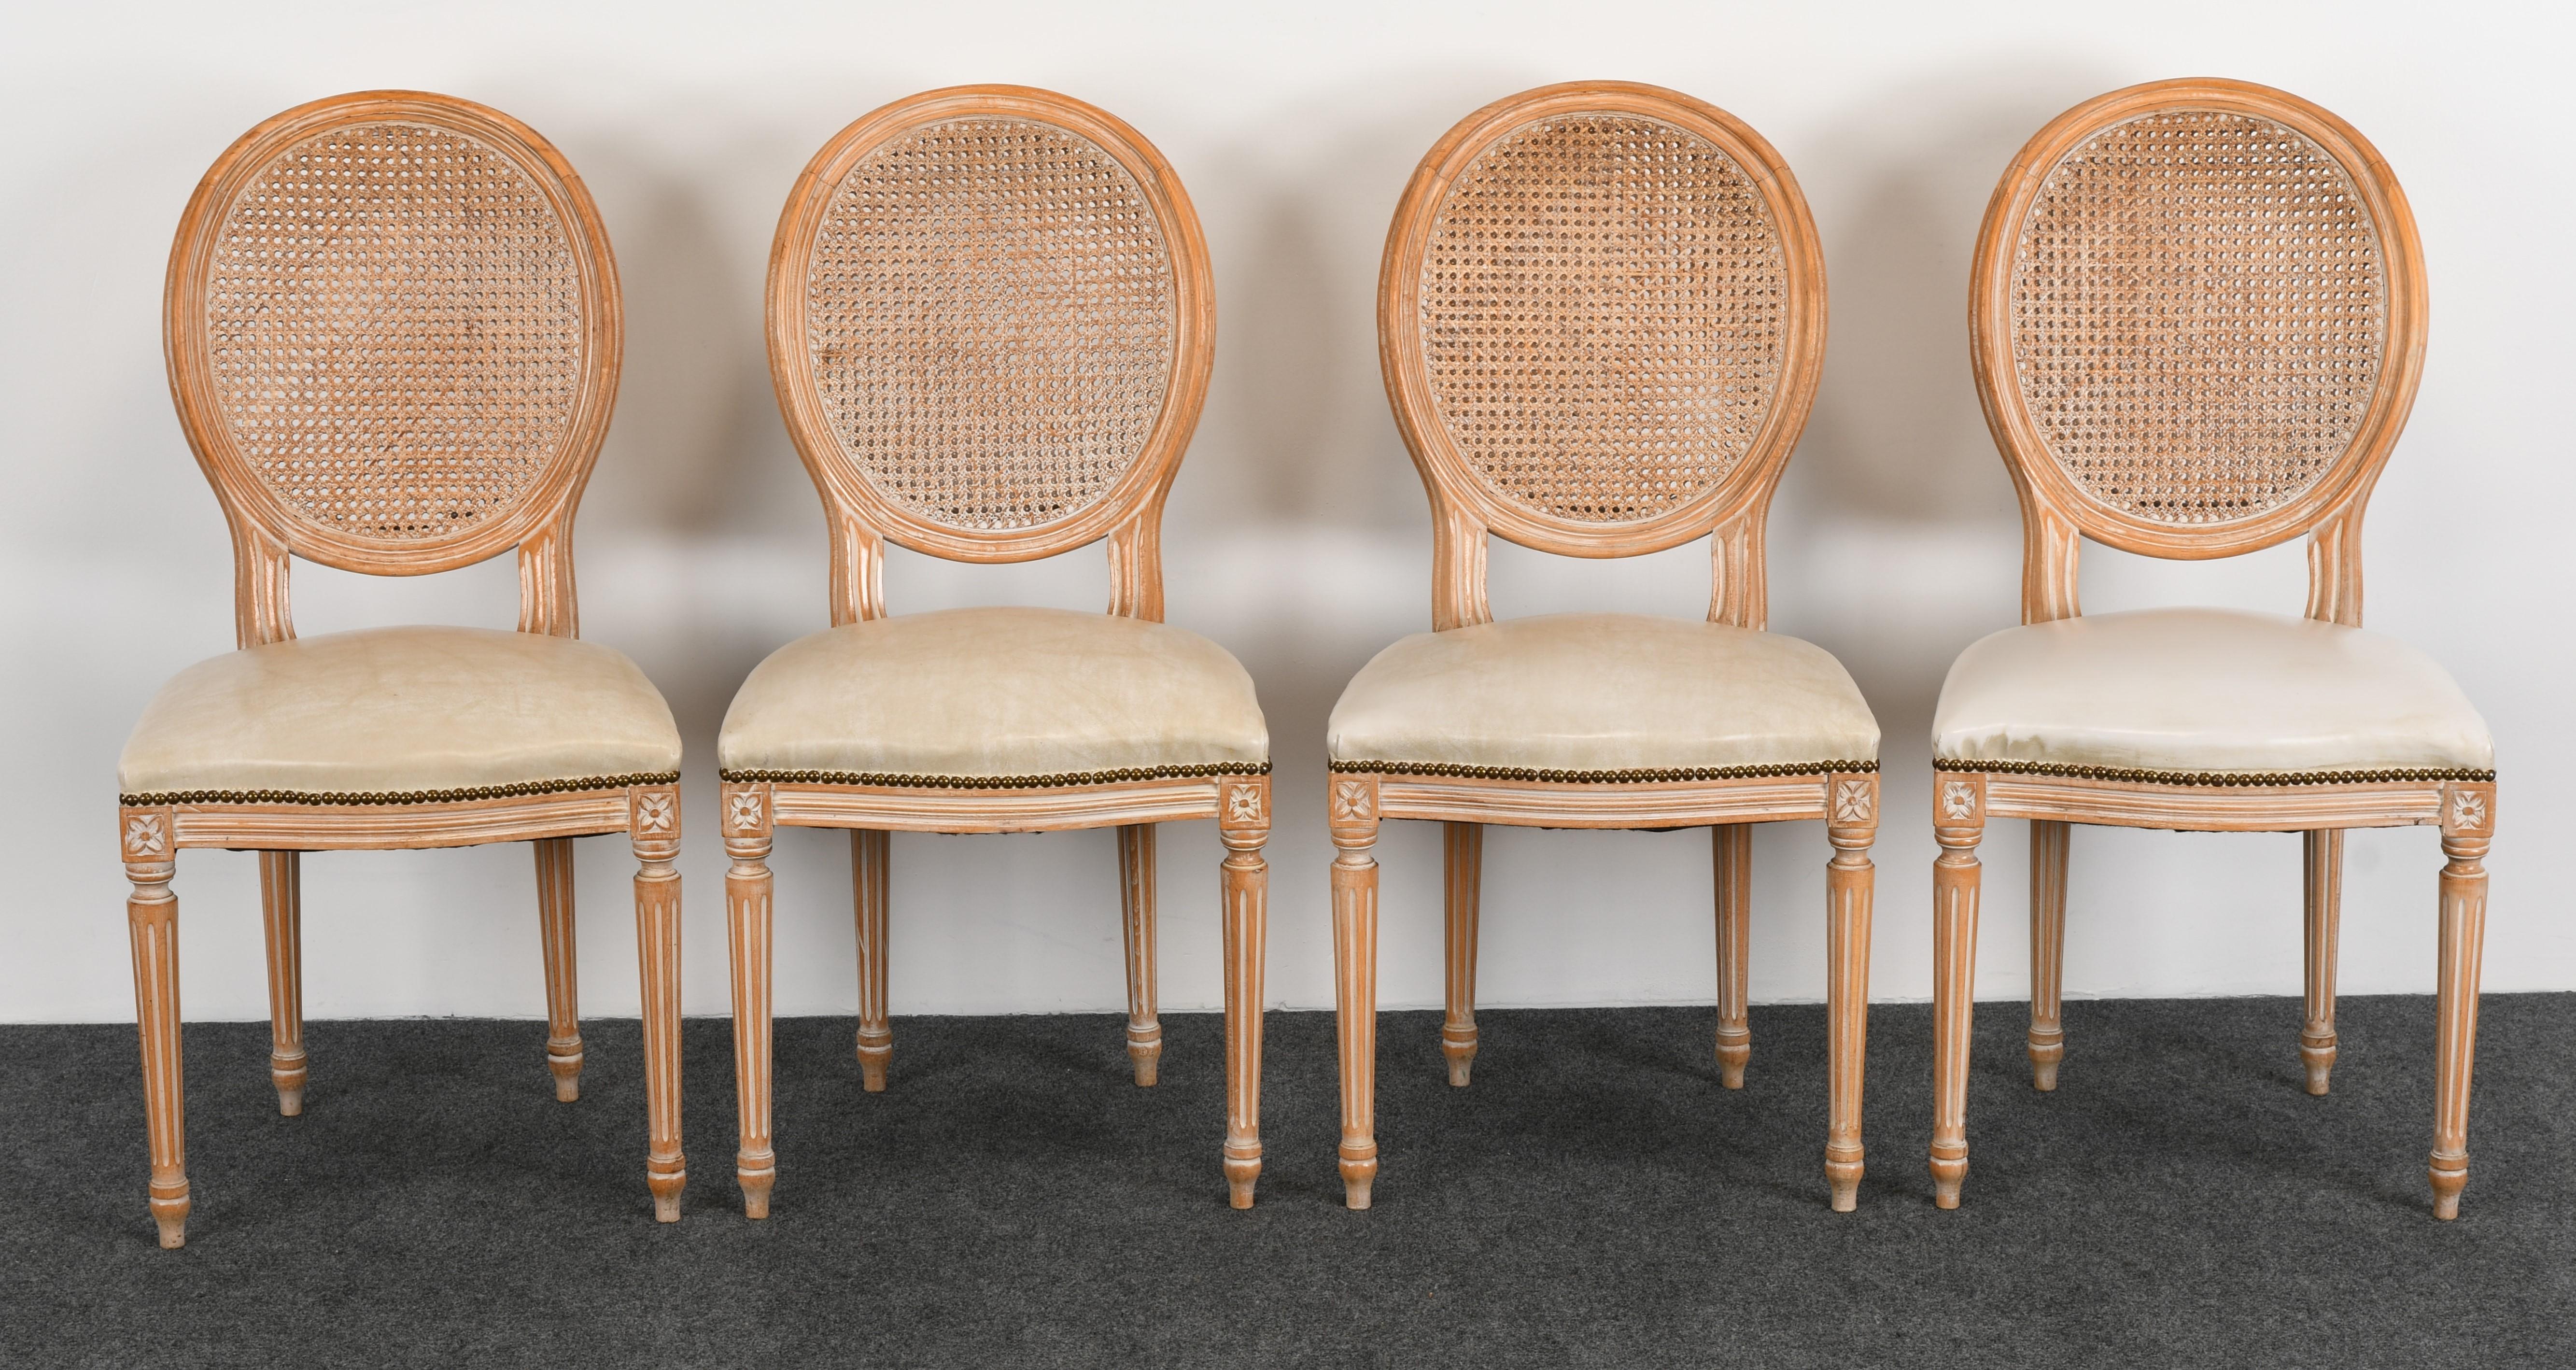 A decorative set of 6 French Louis XVI style solid beech wood dining chairs with oval and cane backs. There are four side chairs and two armchairs. New upholstery is necessary. Chairs are structurally sound, very good vintage condition with